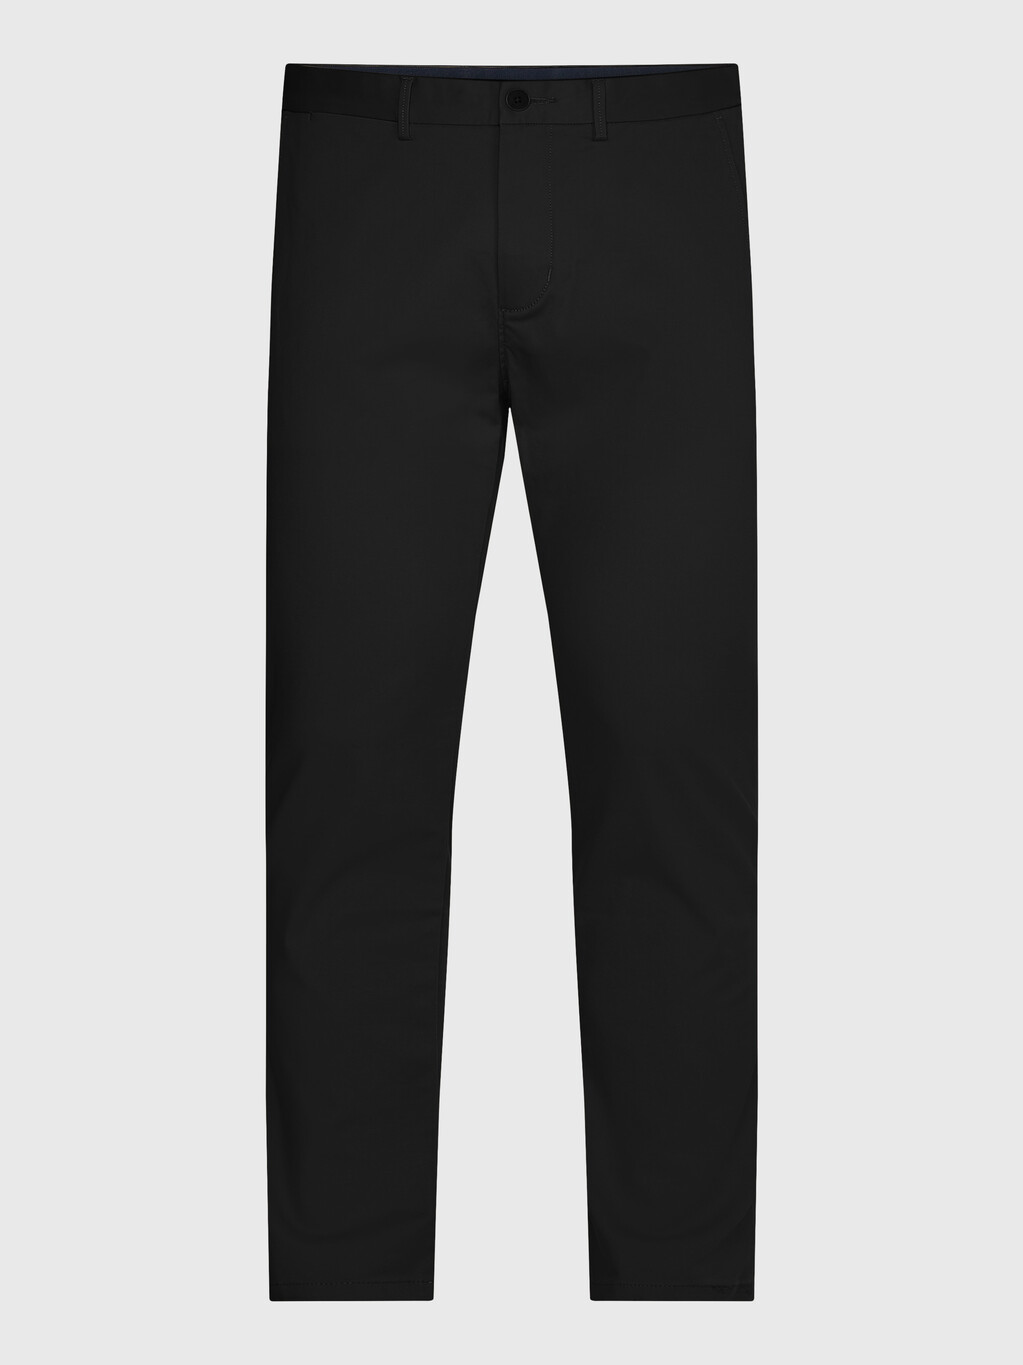 1985 Collection Bleecker Slim Fit Chinos, Black, hi-res